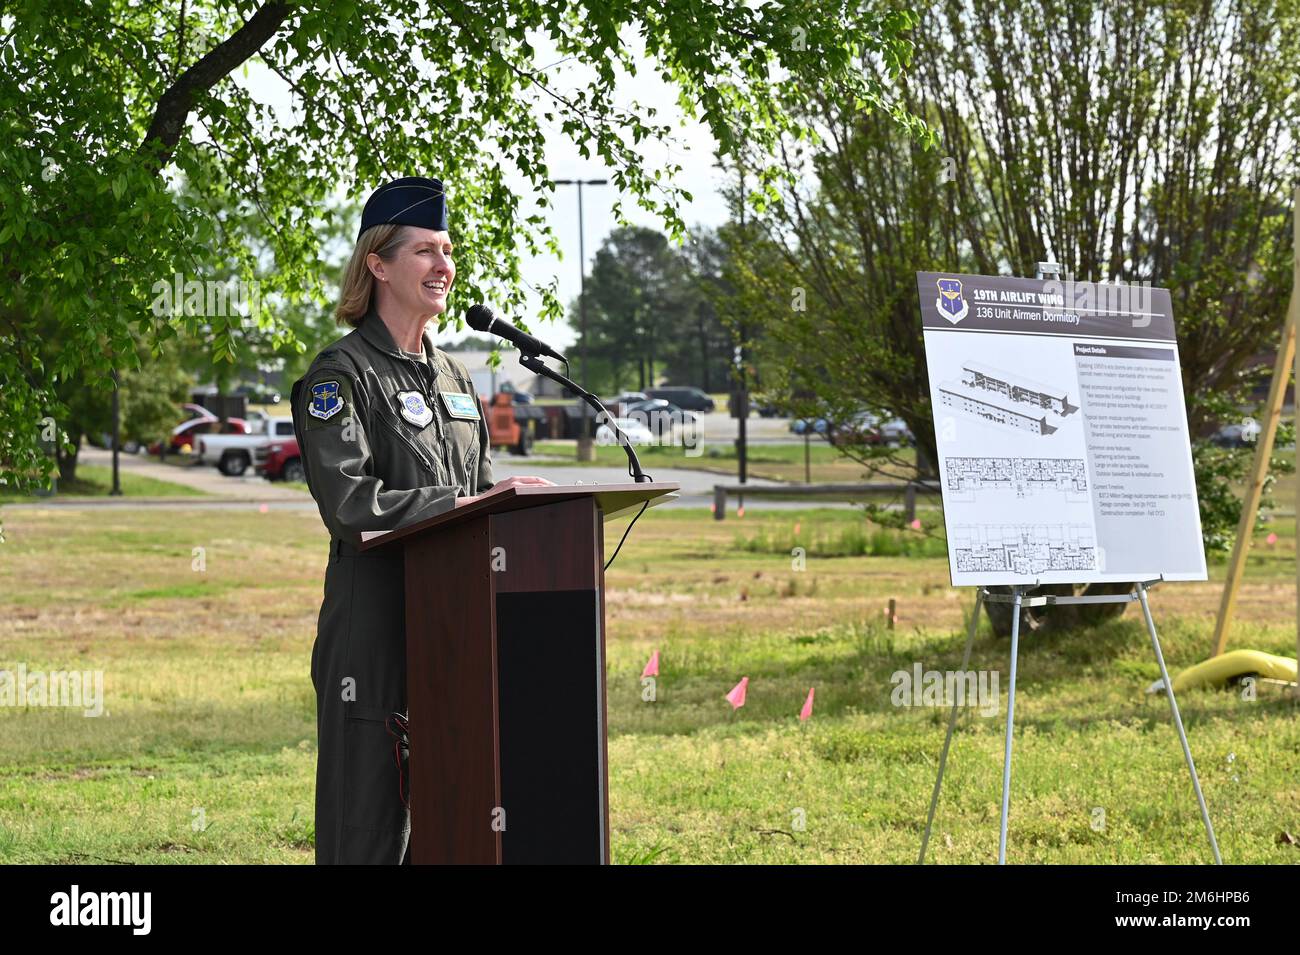 Col. Angela Ochoa, 19th Airlift Wing commander, provides opening remarks project during a groundbreaking ceremony at Little Rock Air Force Base, Arkansas, April 28, 2022. The $32 million project will construct two three-story permanent party enlisted dormitories to house 136 E-1 to E-4 military personnel in single occupancy dorms. Stock Photo